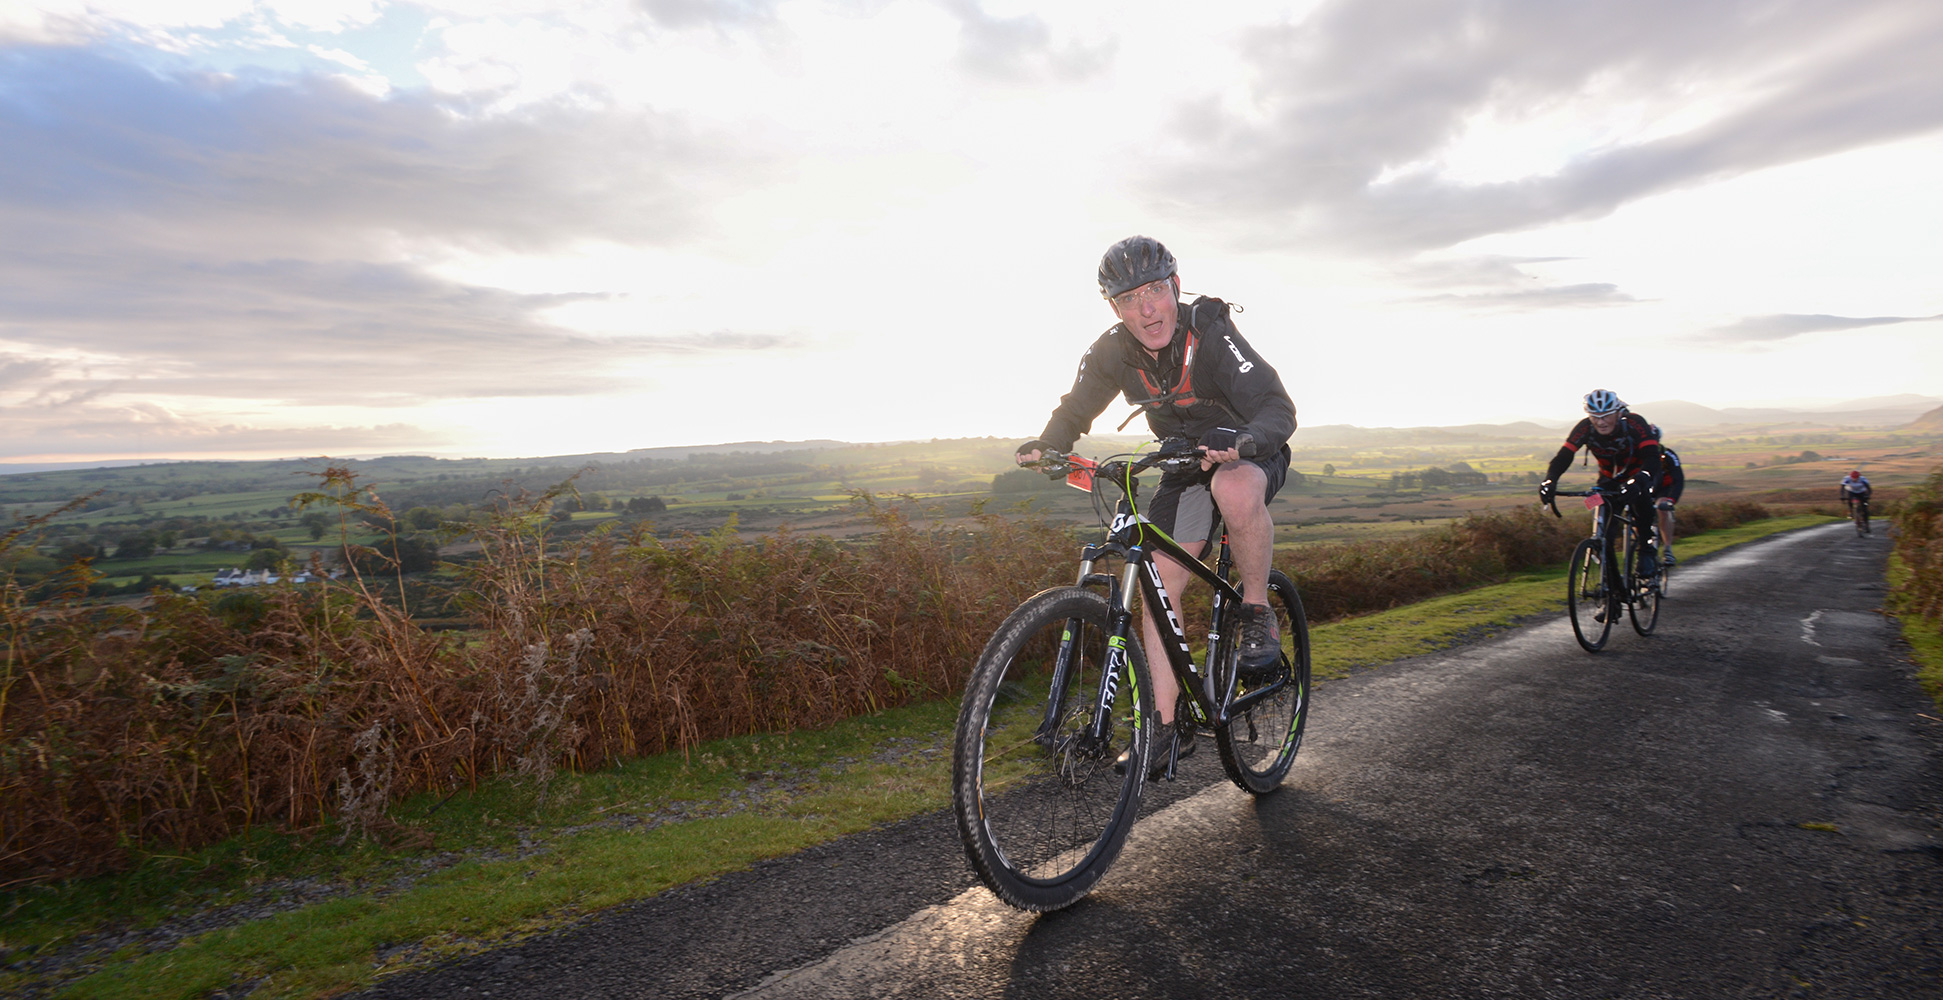 The Monster Miles is a 62 mile (55% off road) Cyclo-Cross Sportive in Cumbria organised by Cycling Weekly and run by Rather Be CyclingHere riders are coming up onto Caldbeck Commons from Mosedale